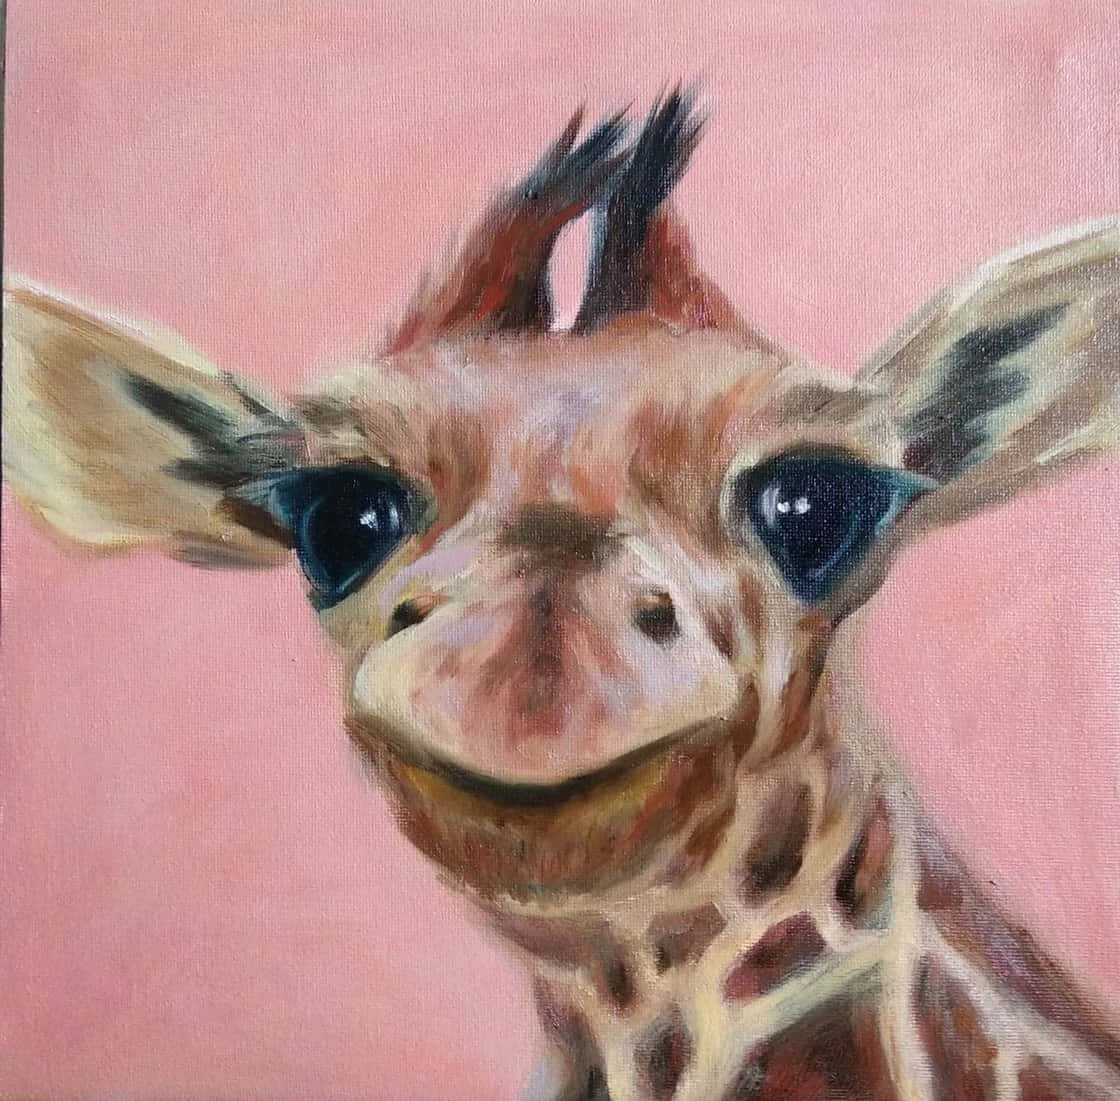 Funny Giraffe With Big Eyes Painting Picture